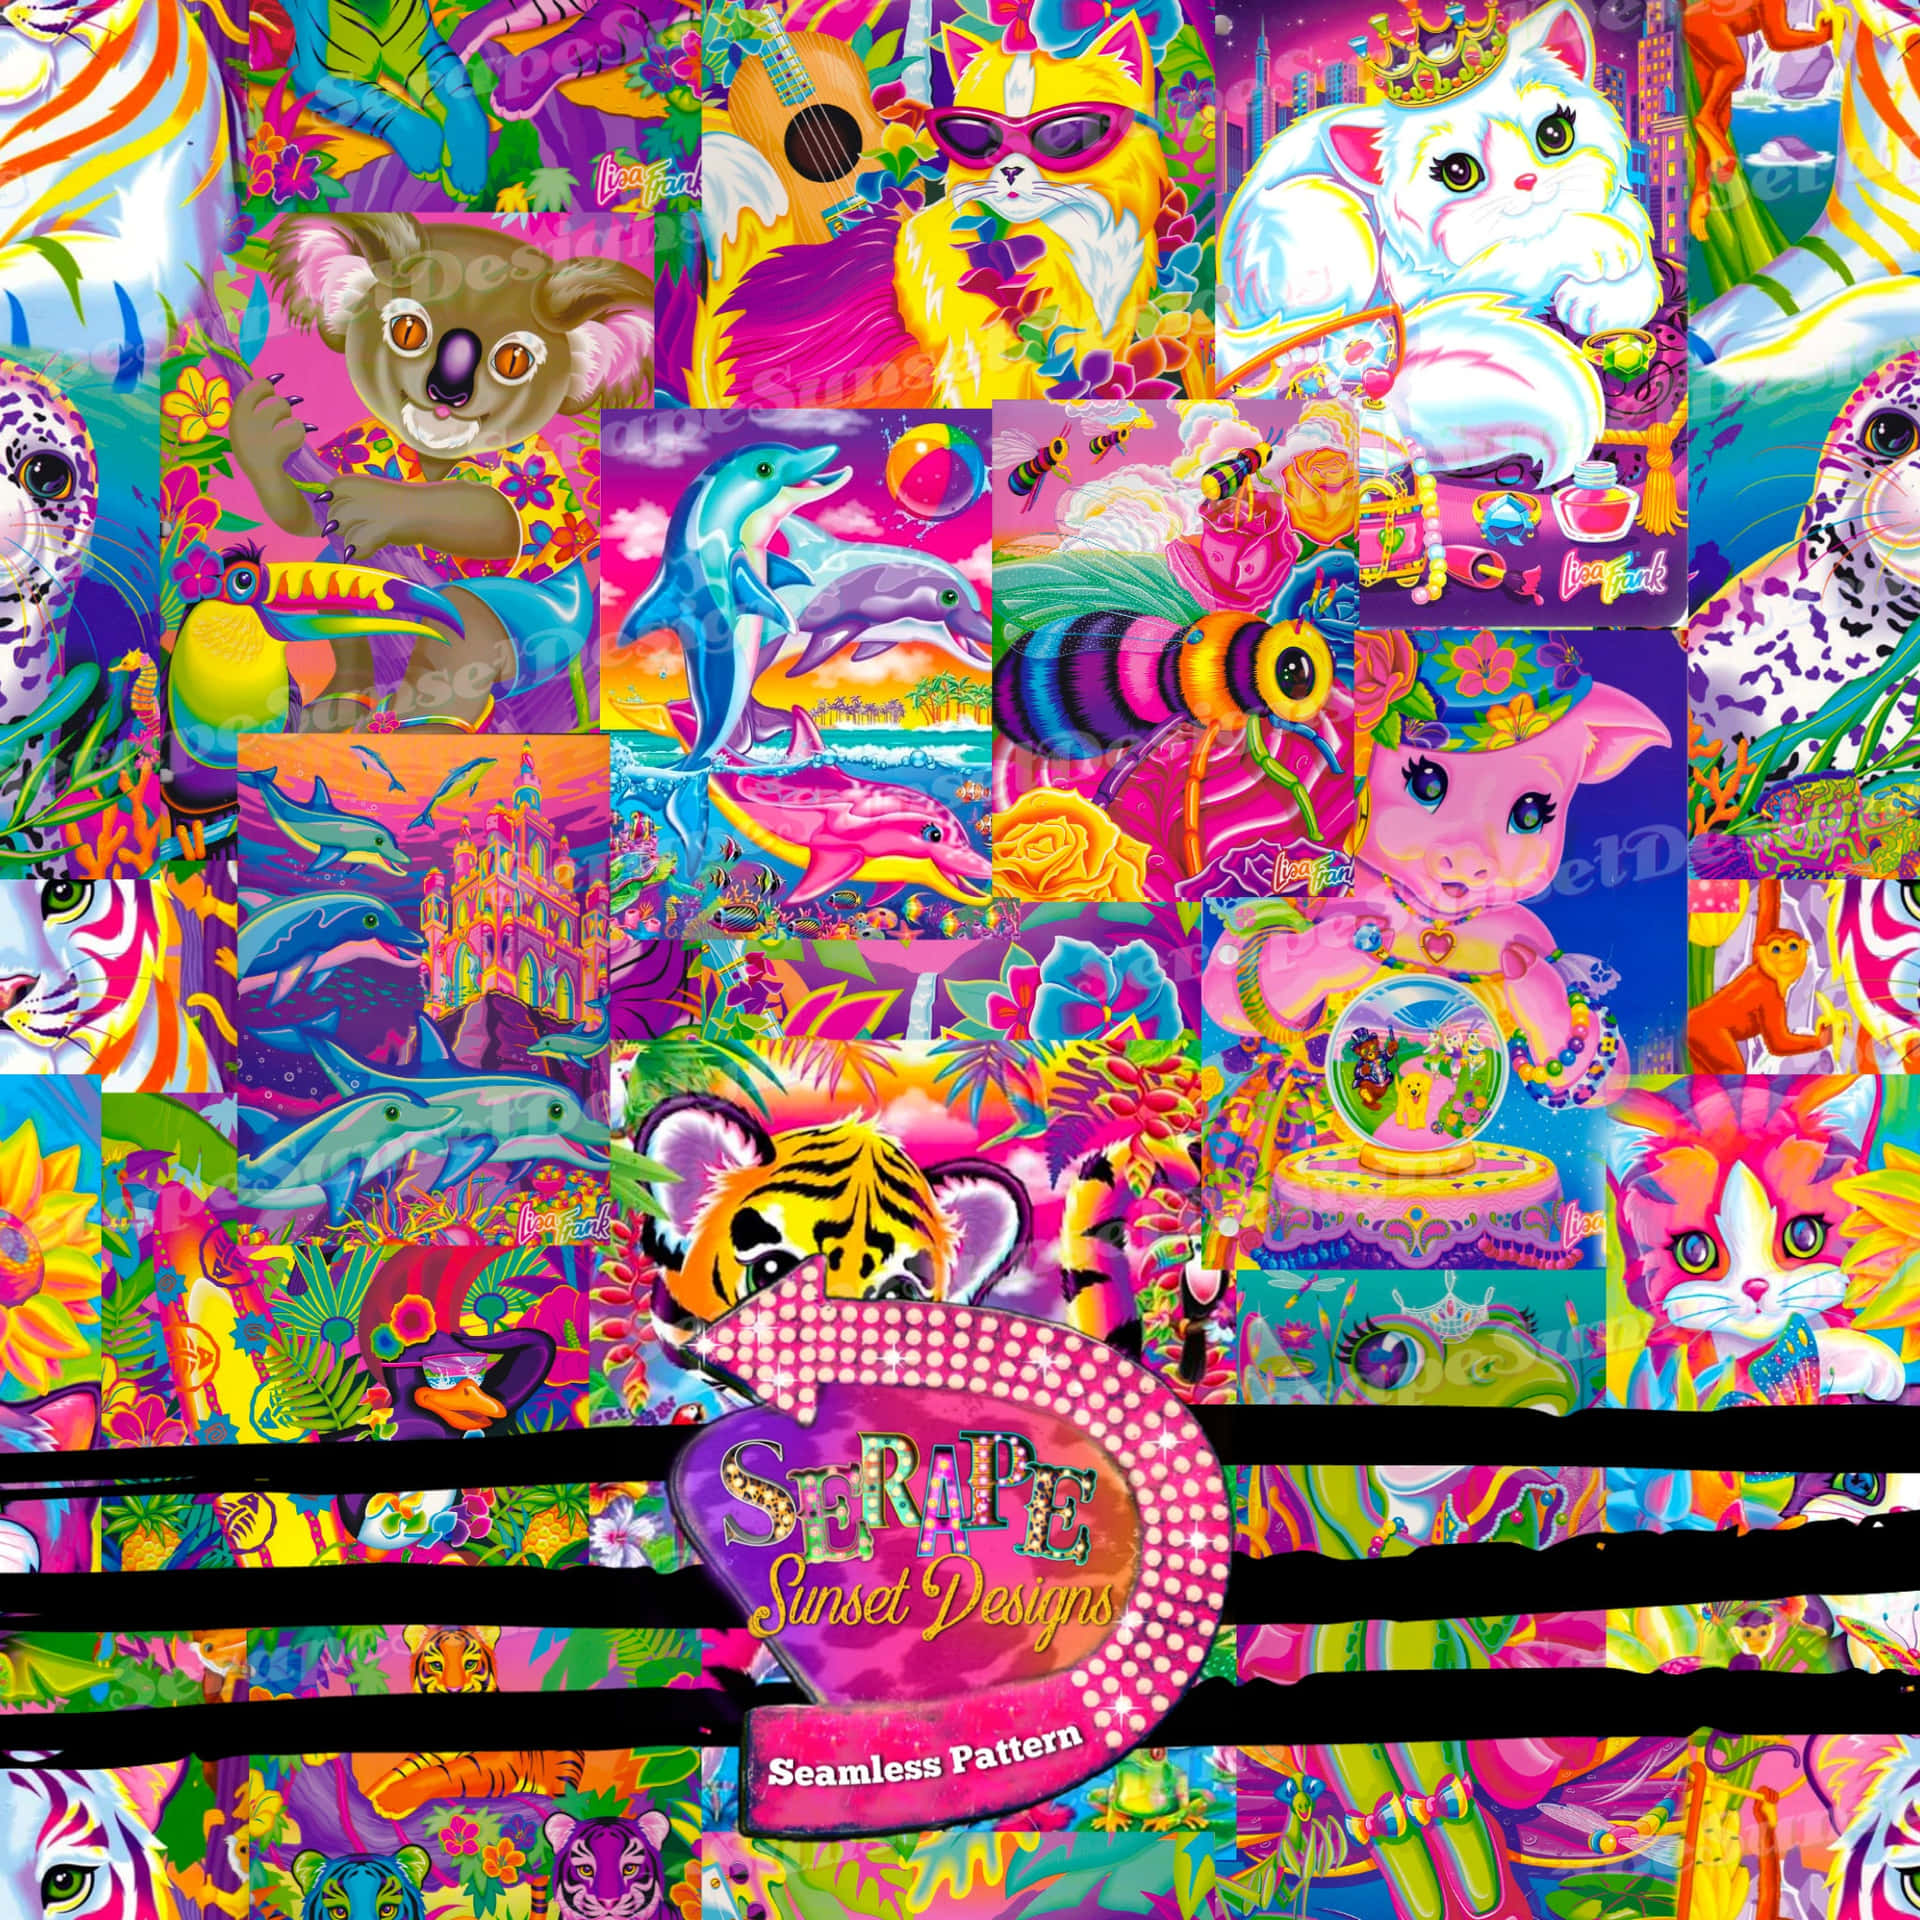 A rainbow of colors brings a spark of joy to the world with this Lisa Frank Unicorn. Wallpaper